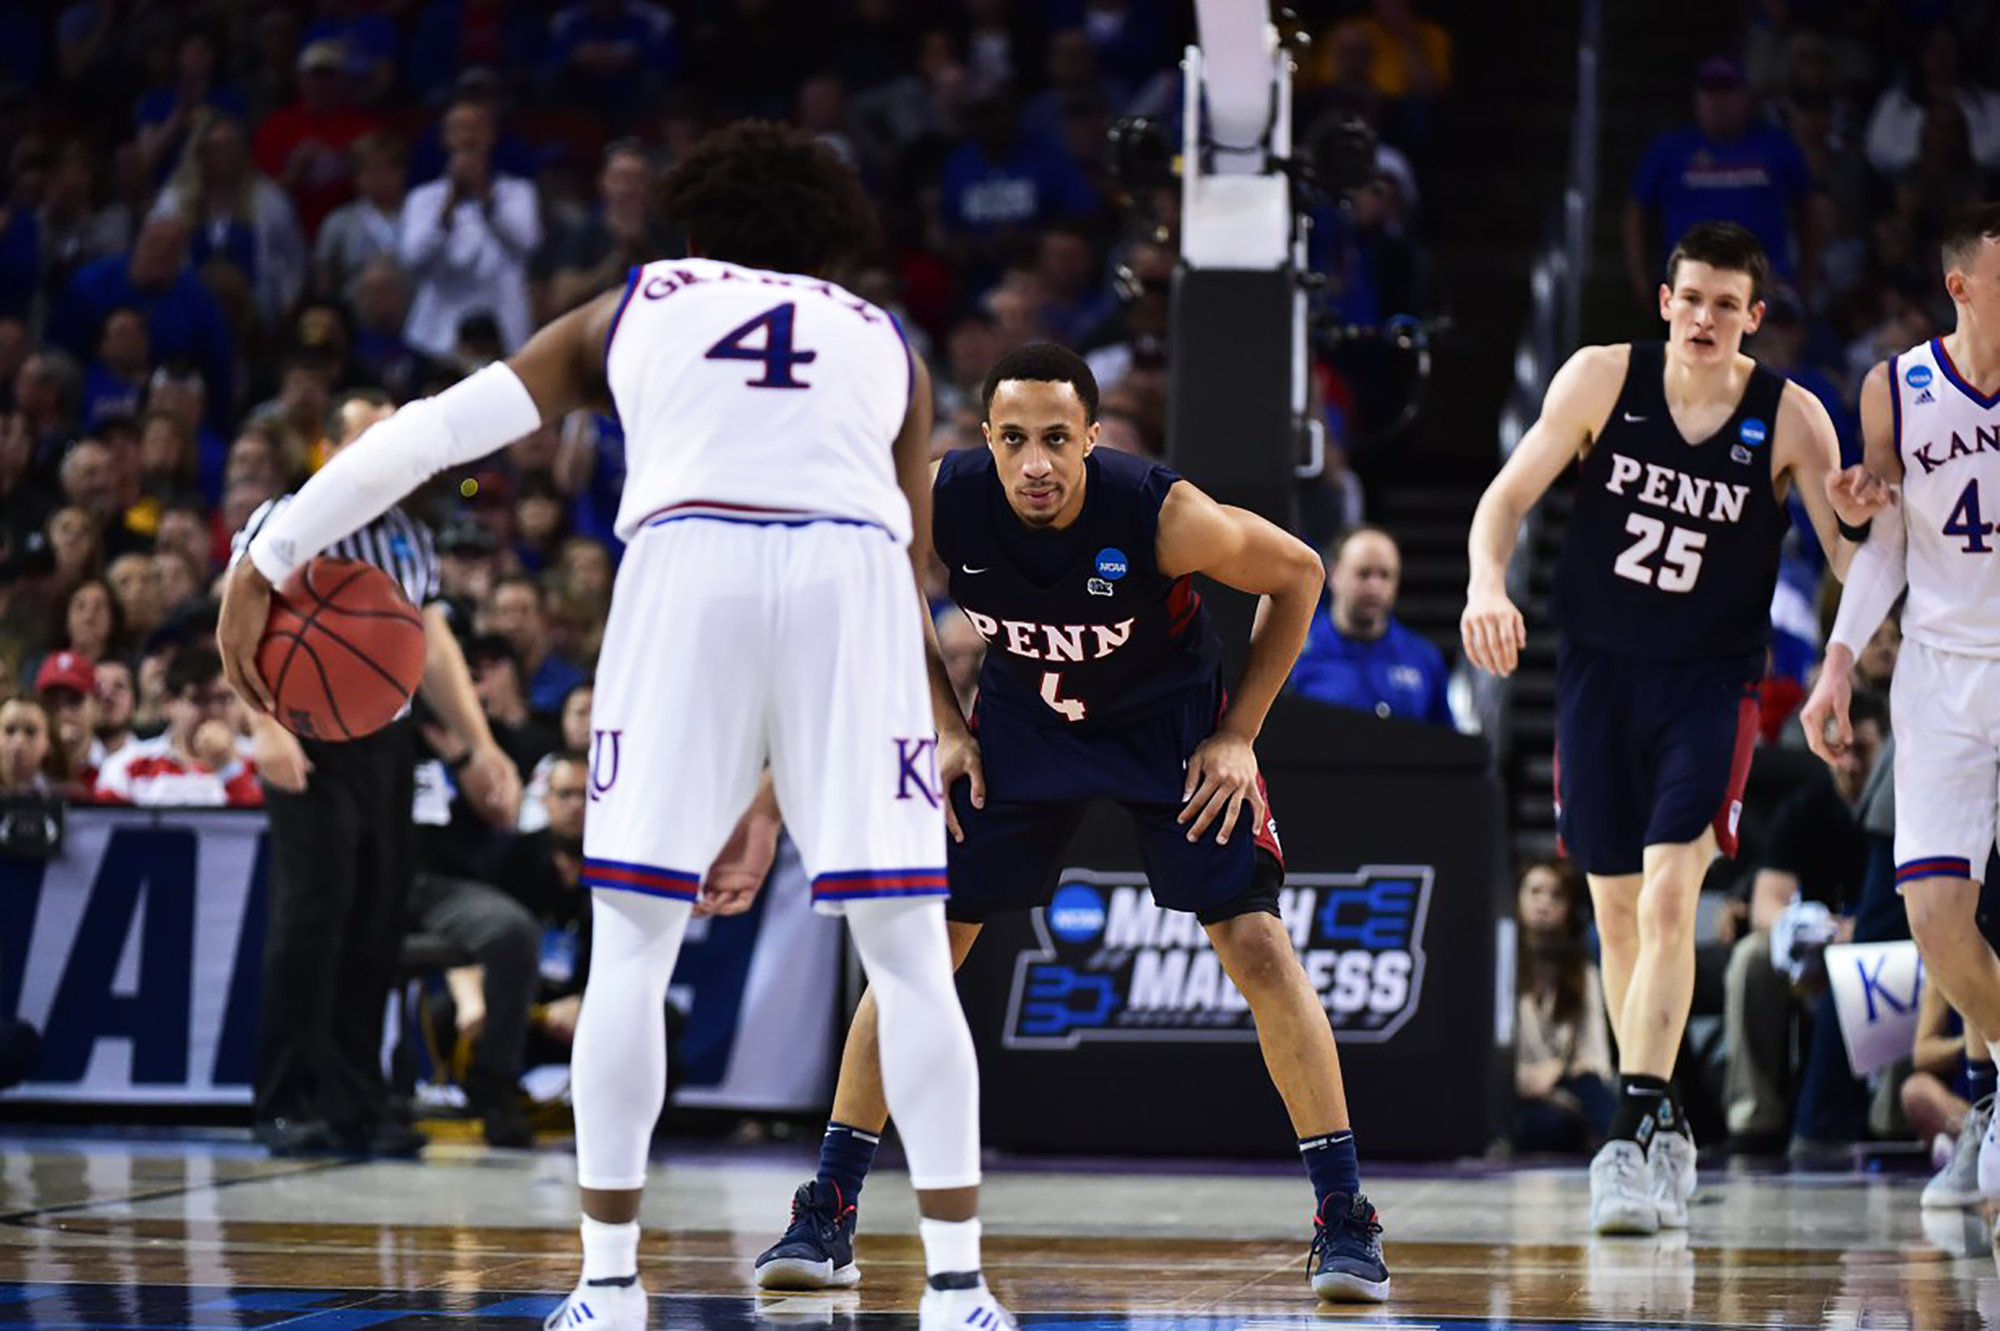 No. 16 seed Penn takes on No. 1 seed Kansas in the First Round of the 2018 NCAA Division I Men’s Basketball Tournament.